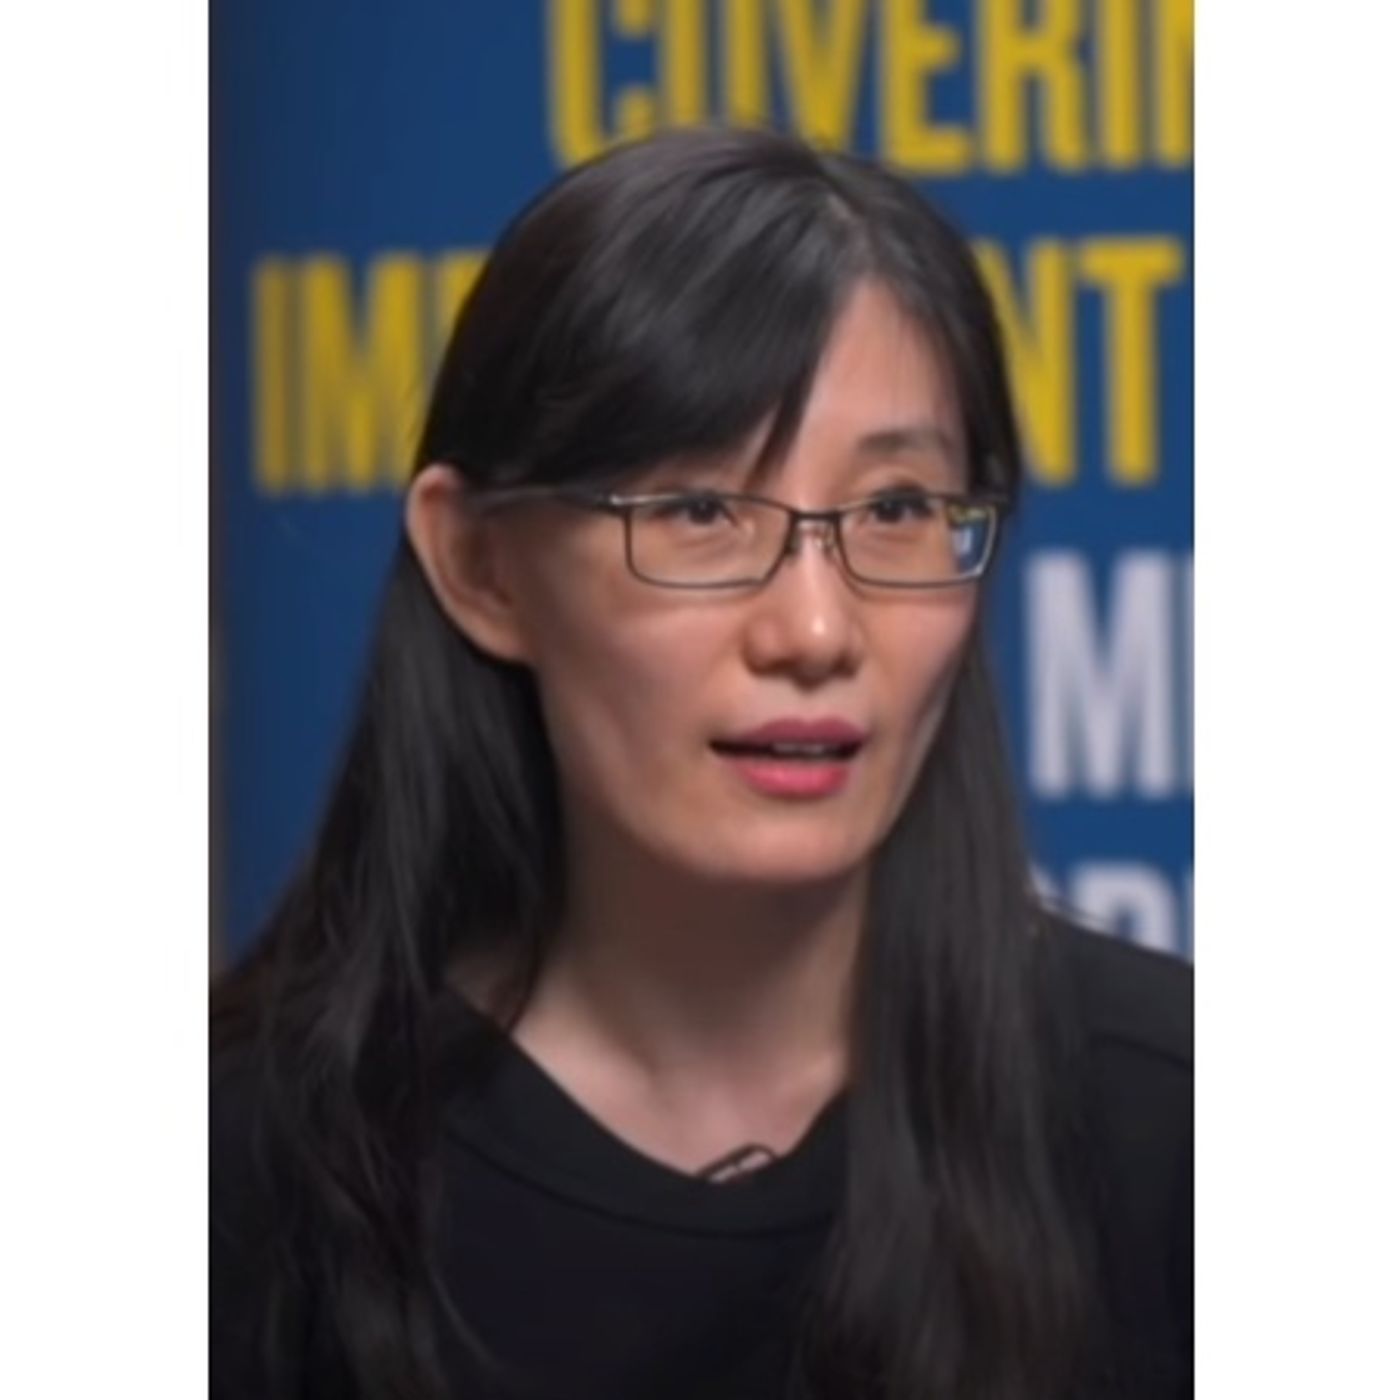 Meet Dr. Li-Meng YAN Virologist That Claims SARS-CoV2 Was Produced in a Lab